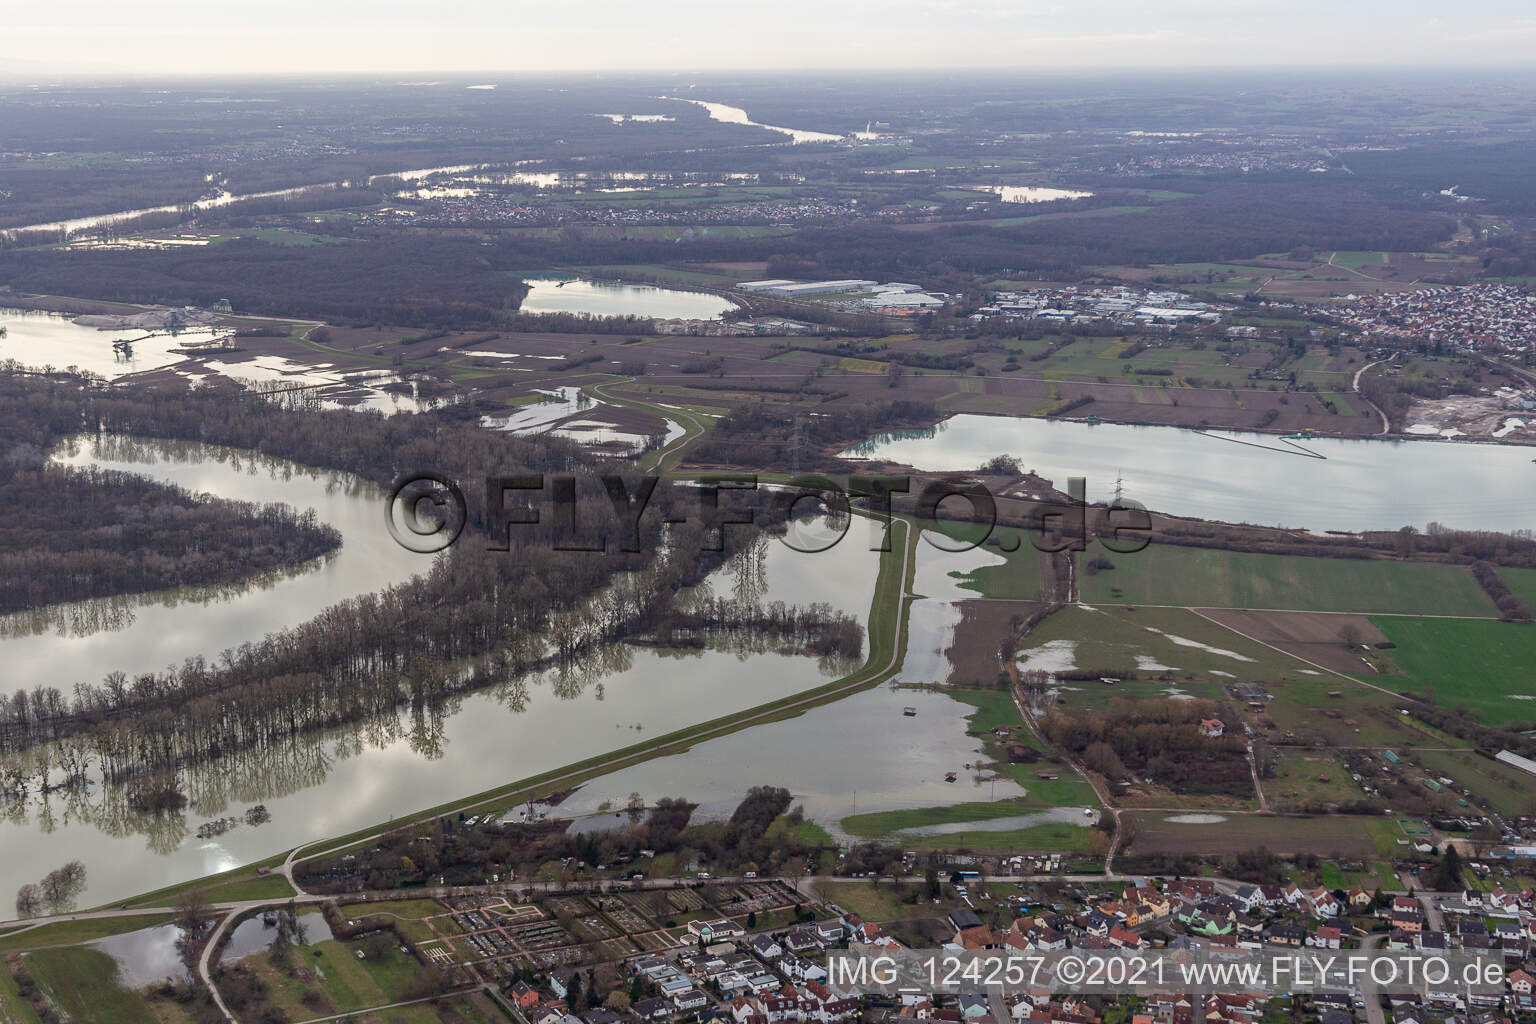 Aerial view of Hagenbacher Altrhein in front of the island of Nauas during flooding in the district Maximiliansau in Wörth am Rhein in the state Rhineland-Palatinate, Germany